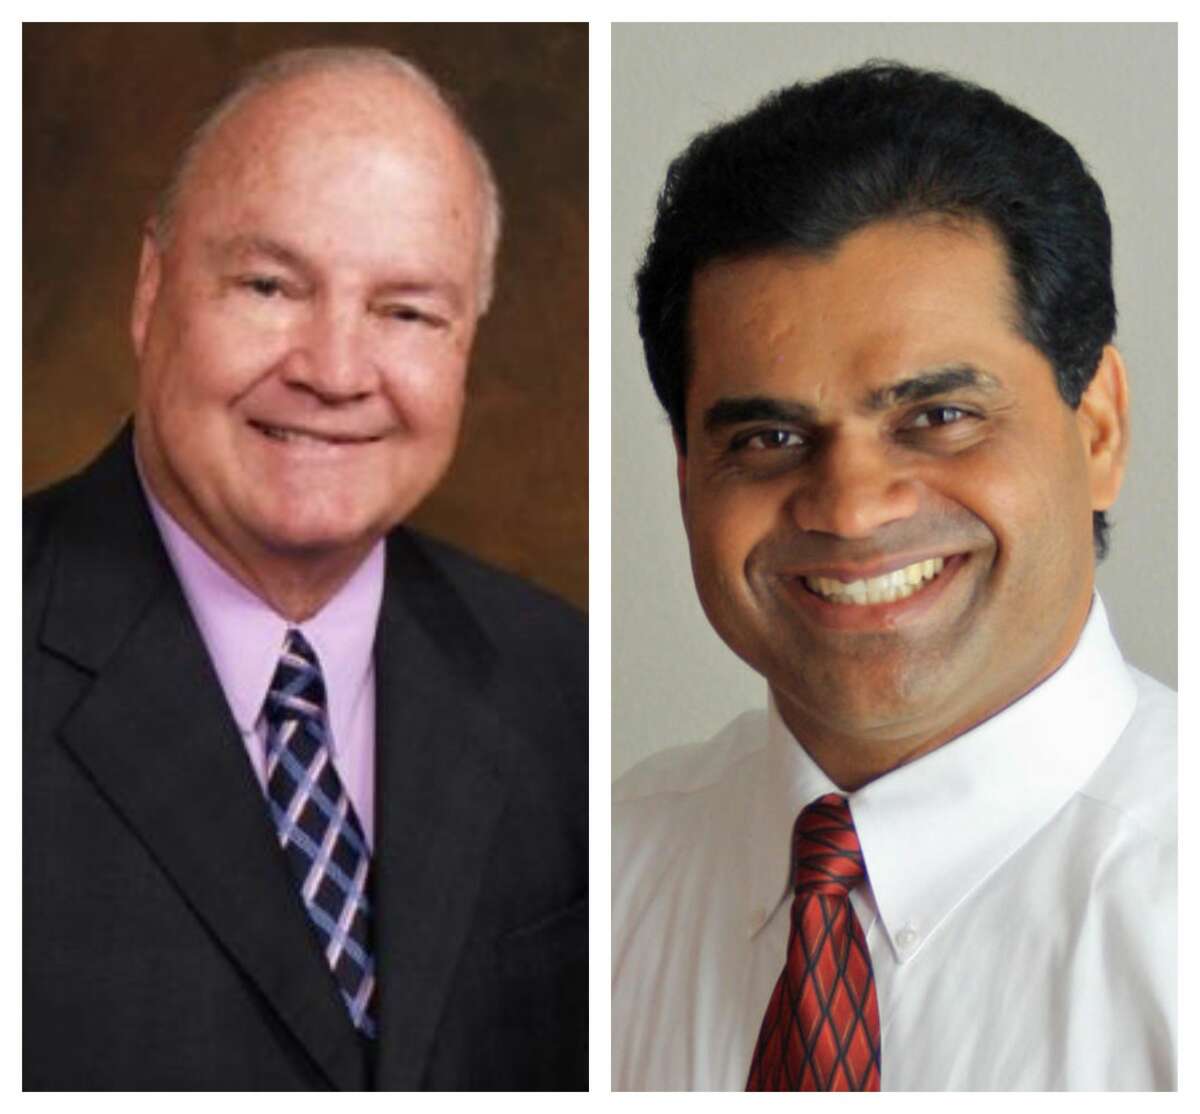 Fort Bend County Judge Incumbent Robert Hebert (right) served as Fort Bend County Judge since 2003 and was unseated by Fort Bend ISD board member KP George. >>>See results from Houston area suburban elections....